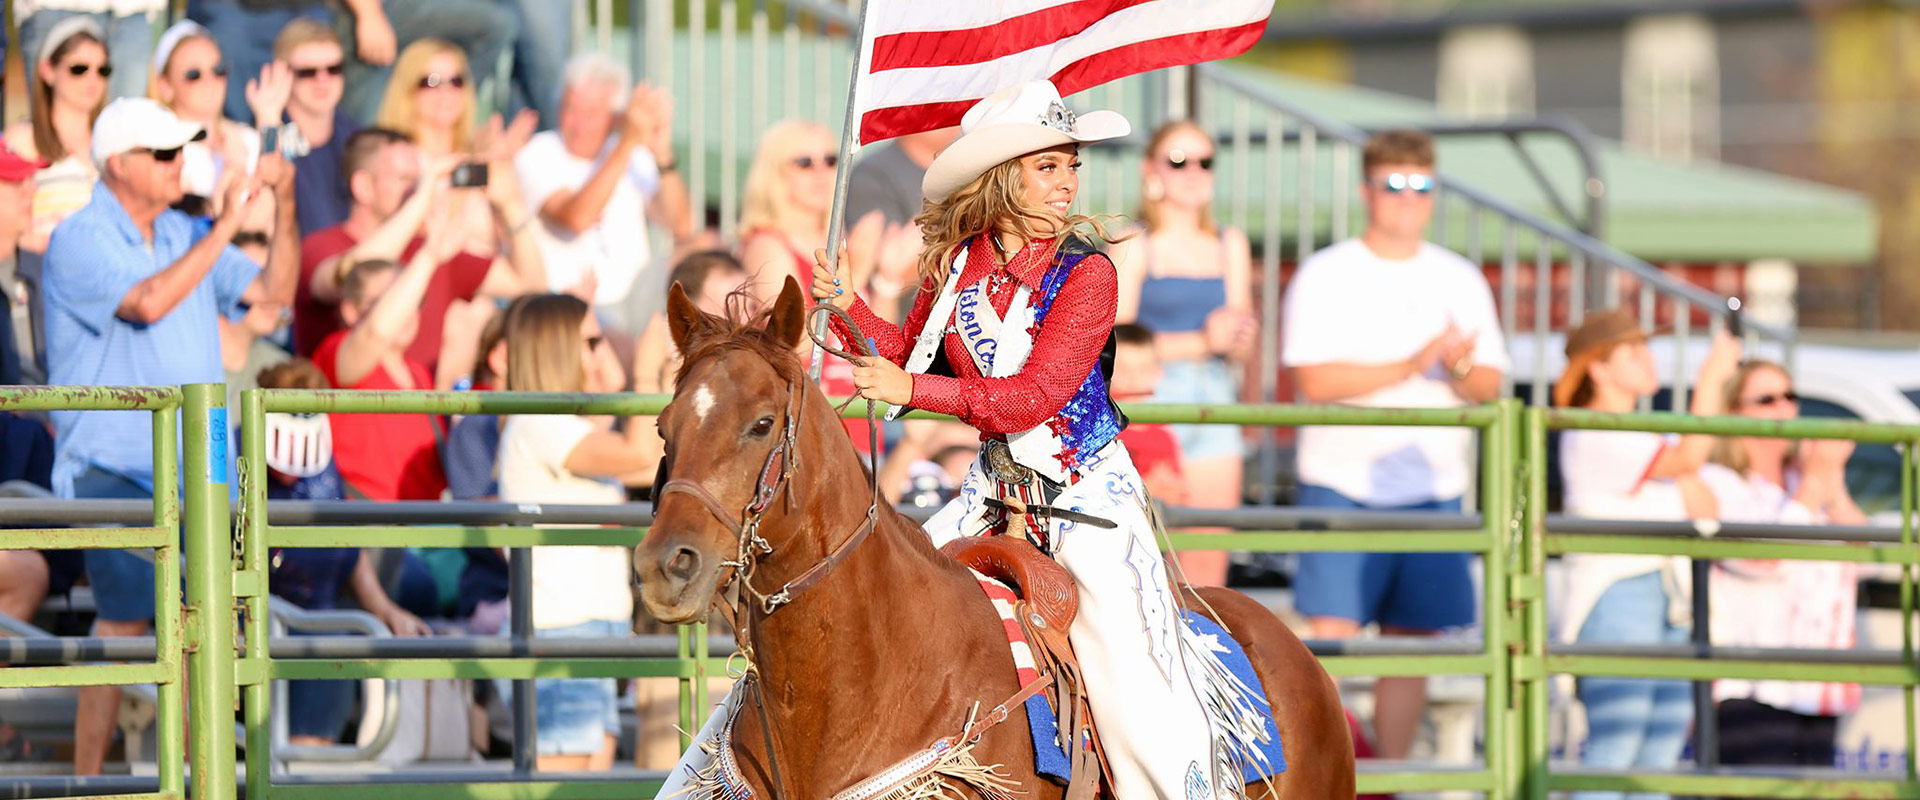 Jackson Hole Rodeo Queen